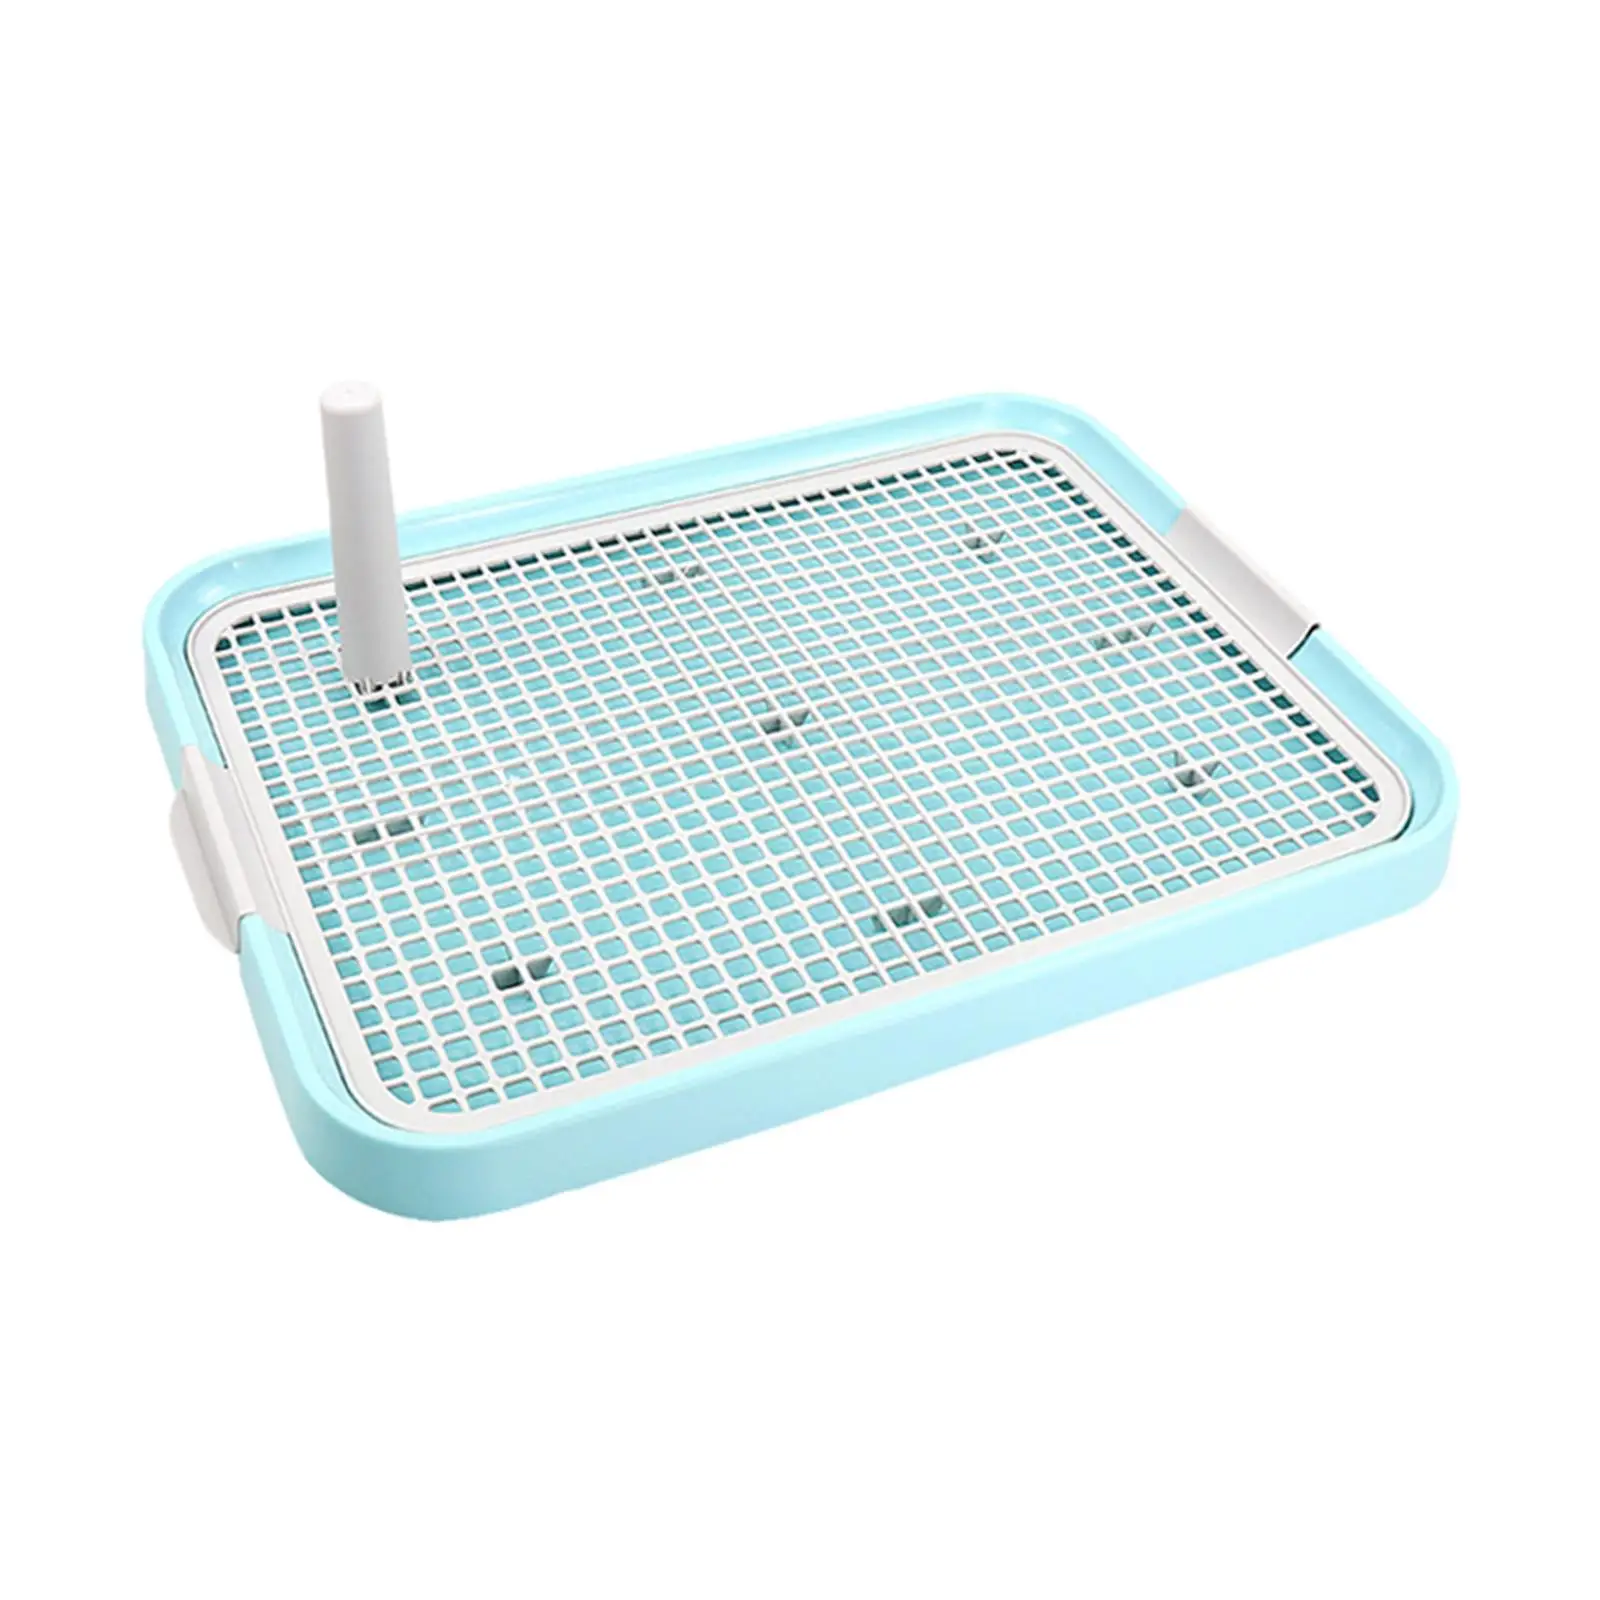 Puppy Dog Potty Tray, Pee Pad Holder, Mesh Training Toilet, Portable Dog Litter Box for Small and Medium Dogs, Bunny, Cats